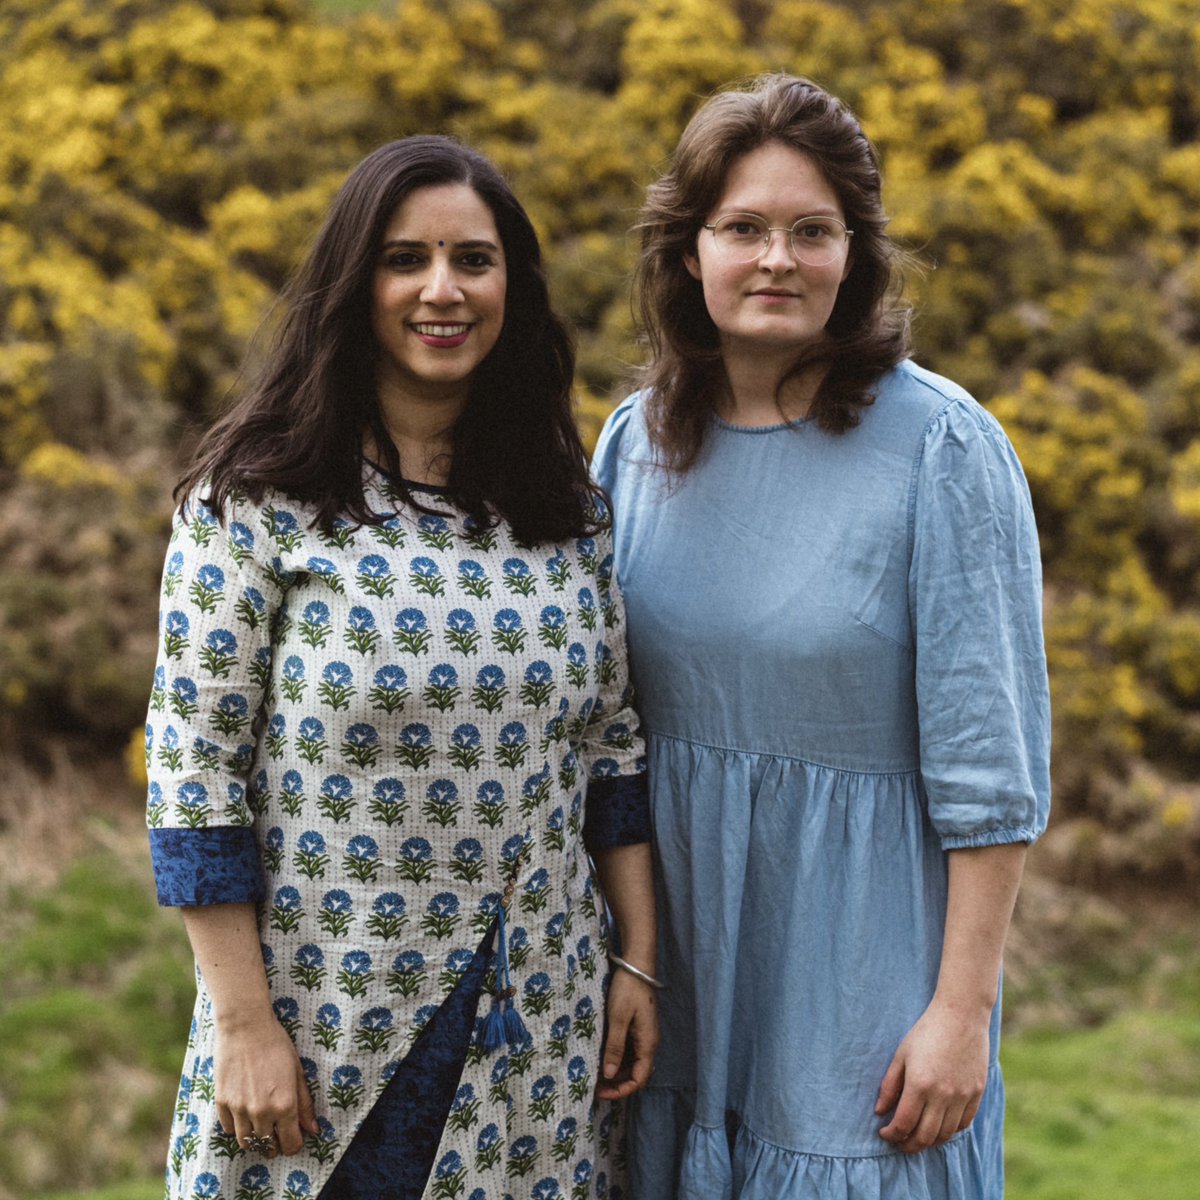 We’re so happy to see the release of ‘Cove’ today, an EP by @IonaLaneMusic and @Ranjanaghatak - continuing their collaboration that was initiated at our 2022 residency @CovePark. It’s spectacular - give it a listen! Listen/buy: hudsonrecords.ffm.to/cove